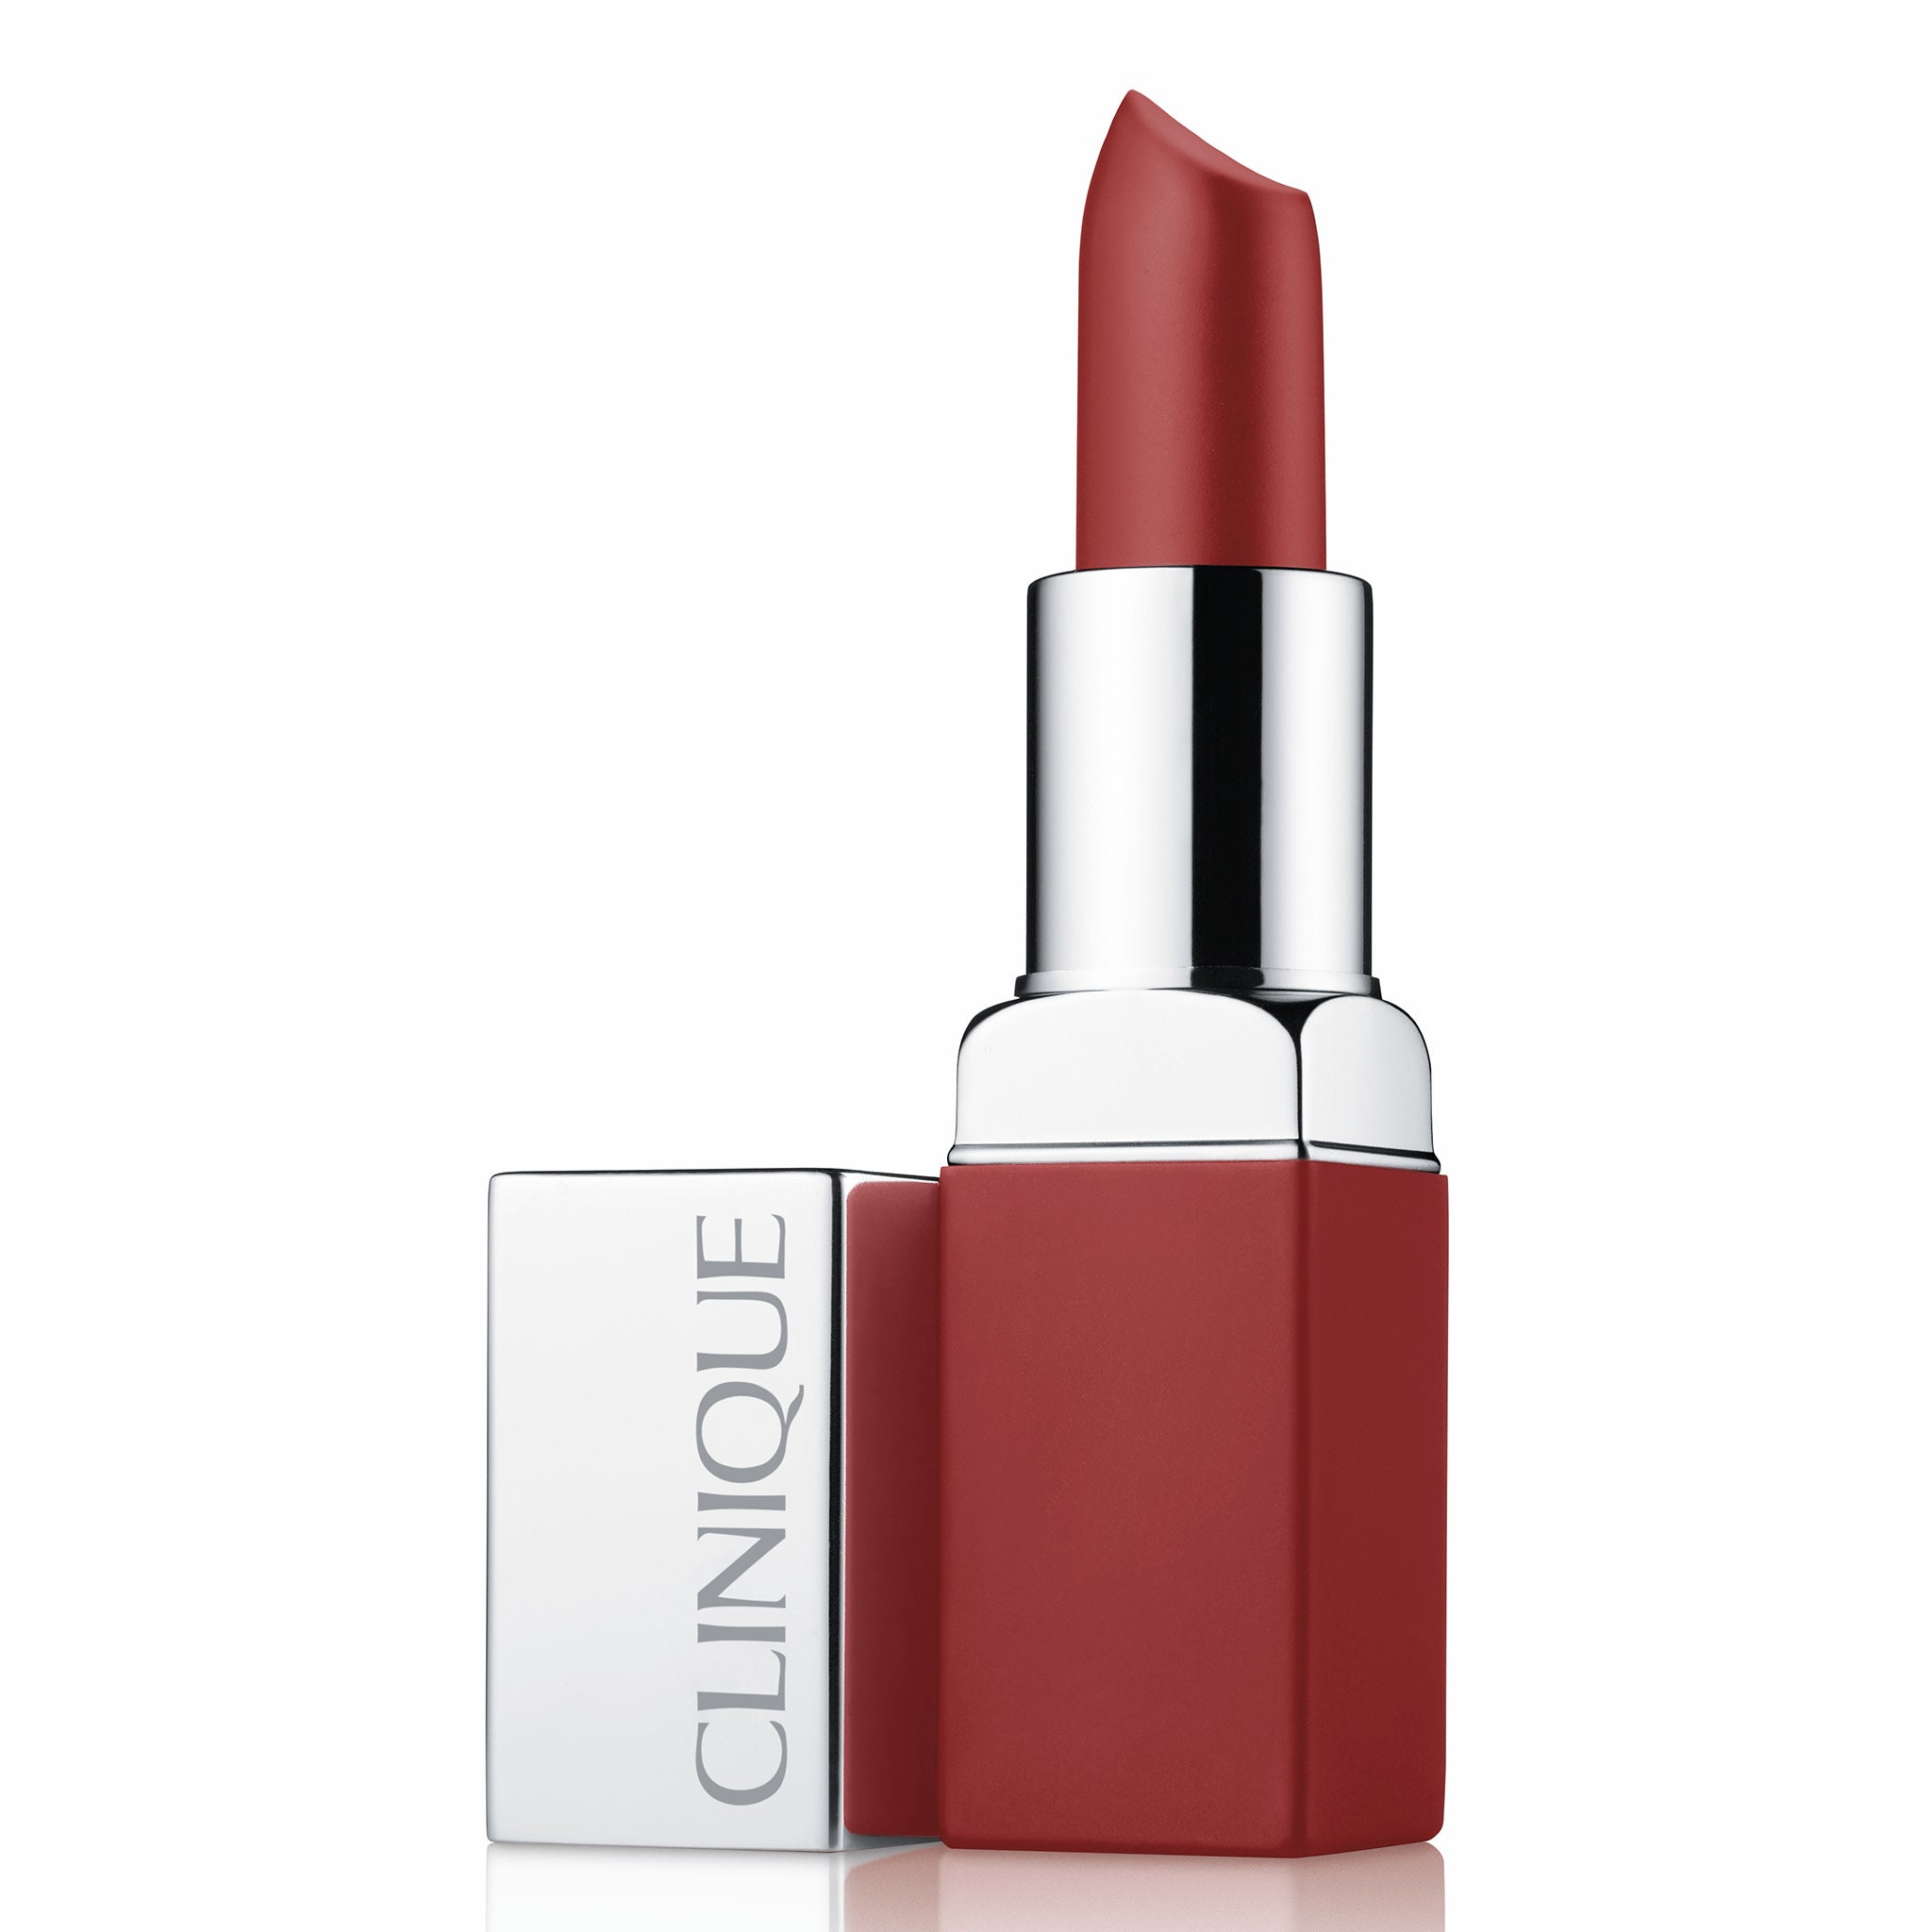 Clinique Clinique Pop Matte Lip Colour + Primer Color/Shade variant: Icon Pop main image. This product is in the color red